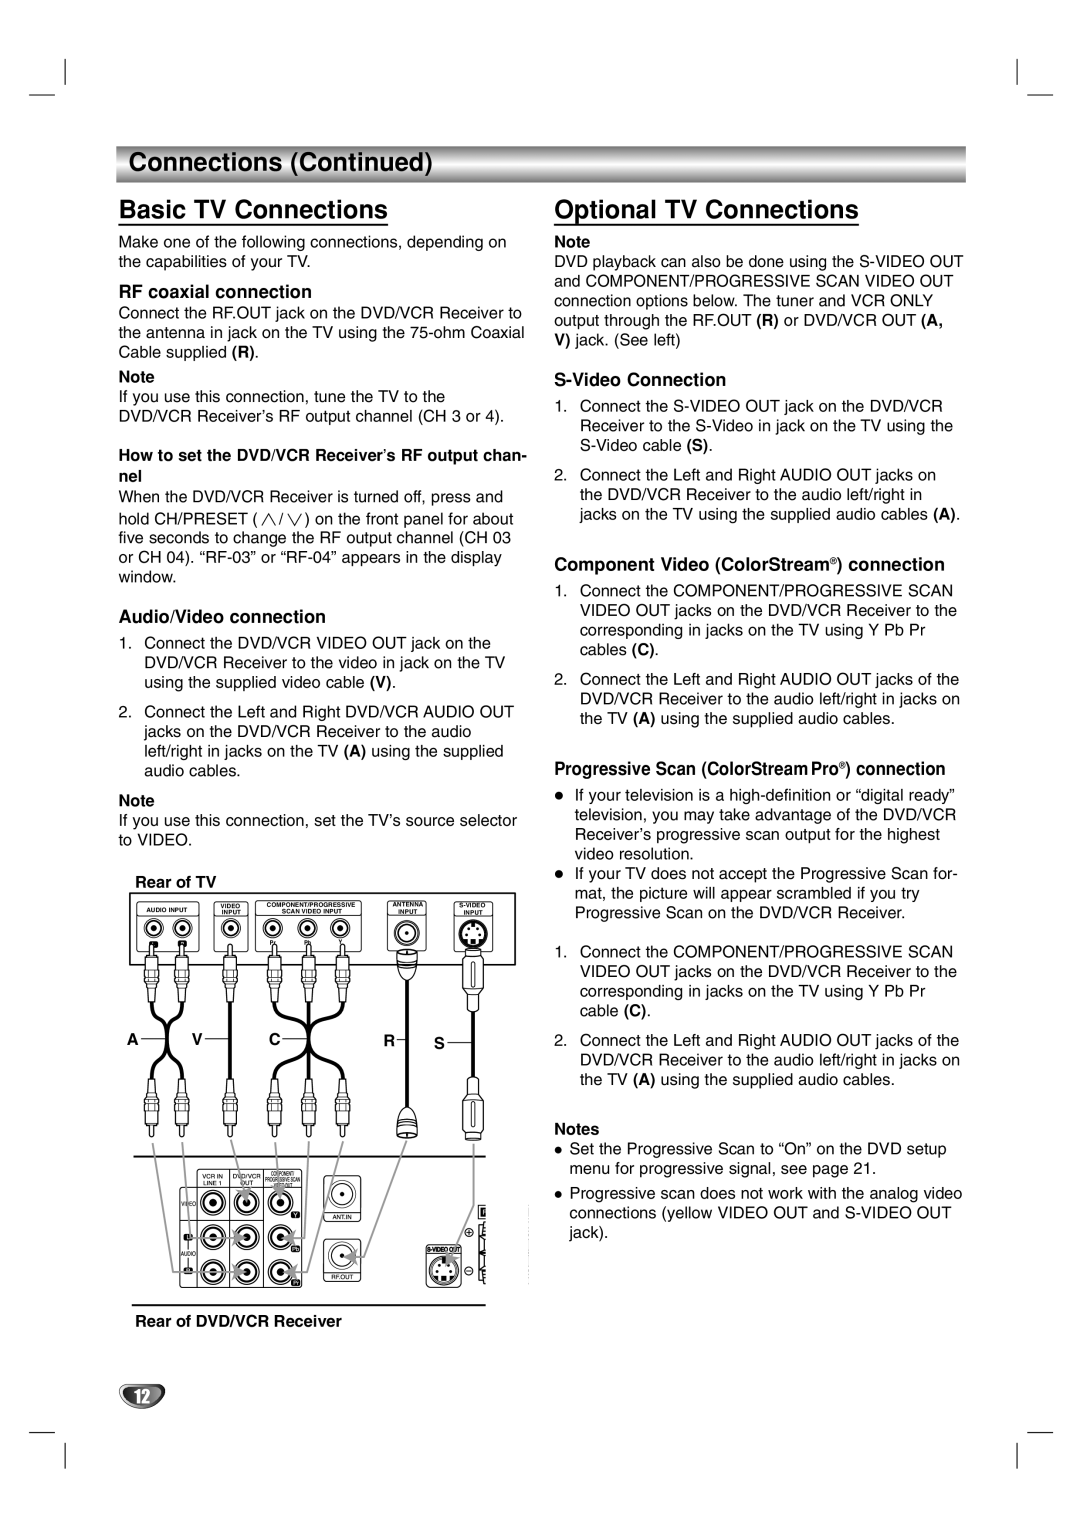 Toshiba SD-V57HTSU owner manual Connections Continued Basic TV Connections, Optional TV Connections, RF coaxial connection 